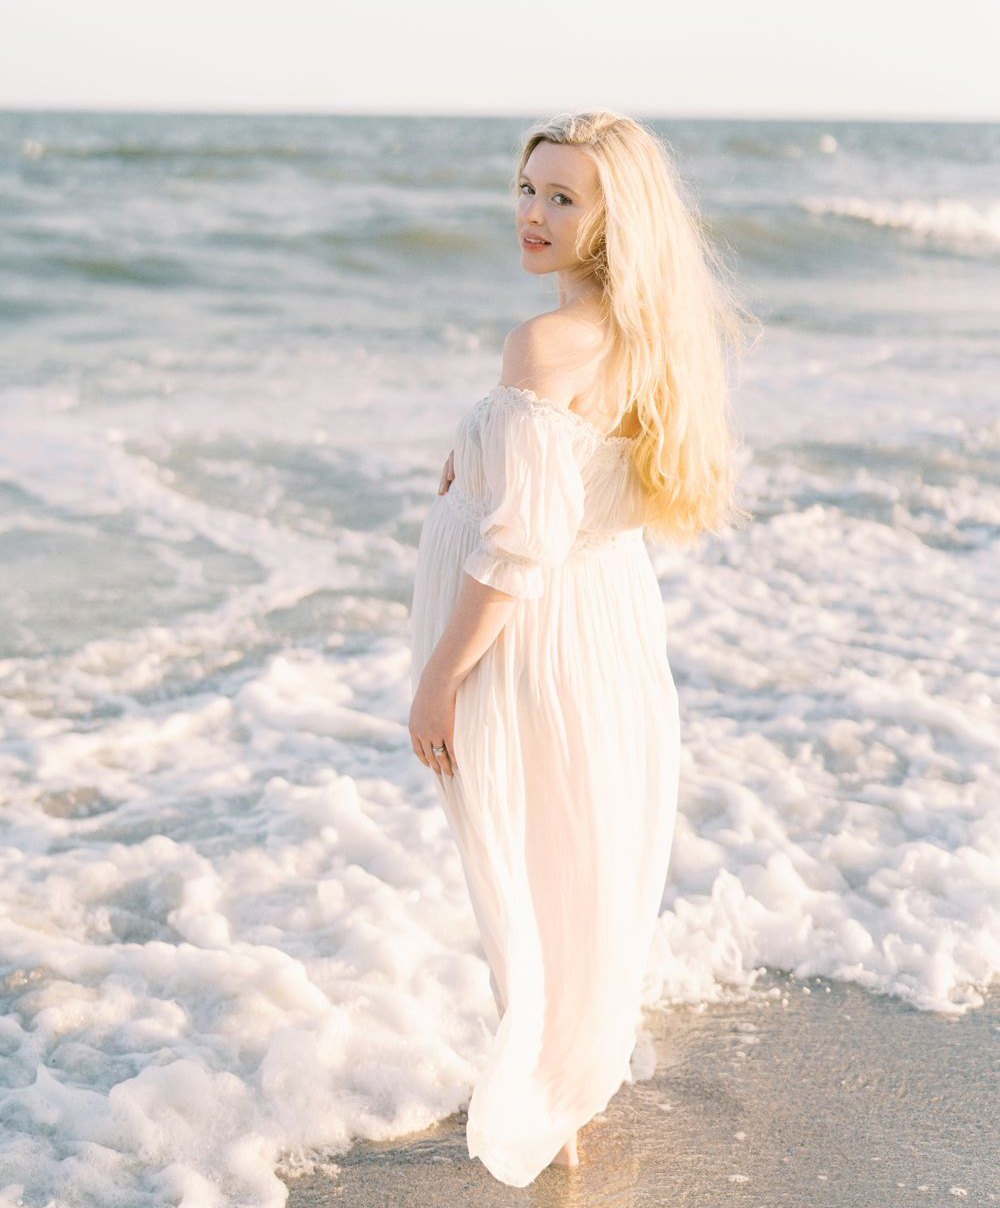 Courtney Houk is a Nashville Newborn photographer who traveled for this Charleston beach maternity session